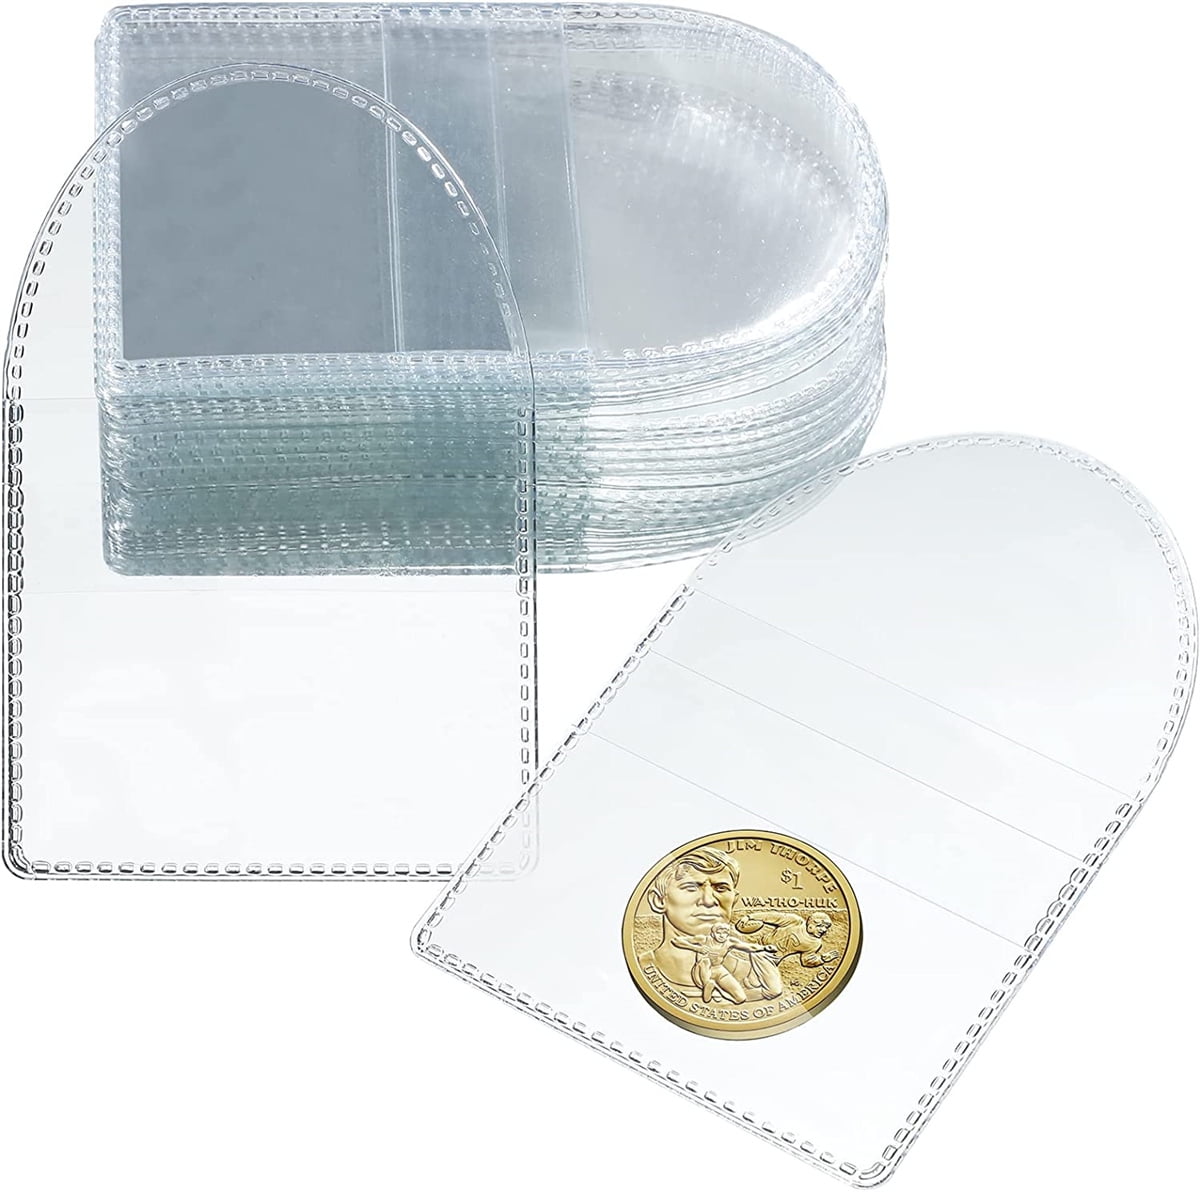 Travelwant 20 Sets Coin Holder, Silver Eagle Protector, 46mm ID, Plastic,  Clear, Airtight Dollar Coins Capsules, American Collectors Cases,  Collection Supplies, Tight Treasures Storage Containers 